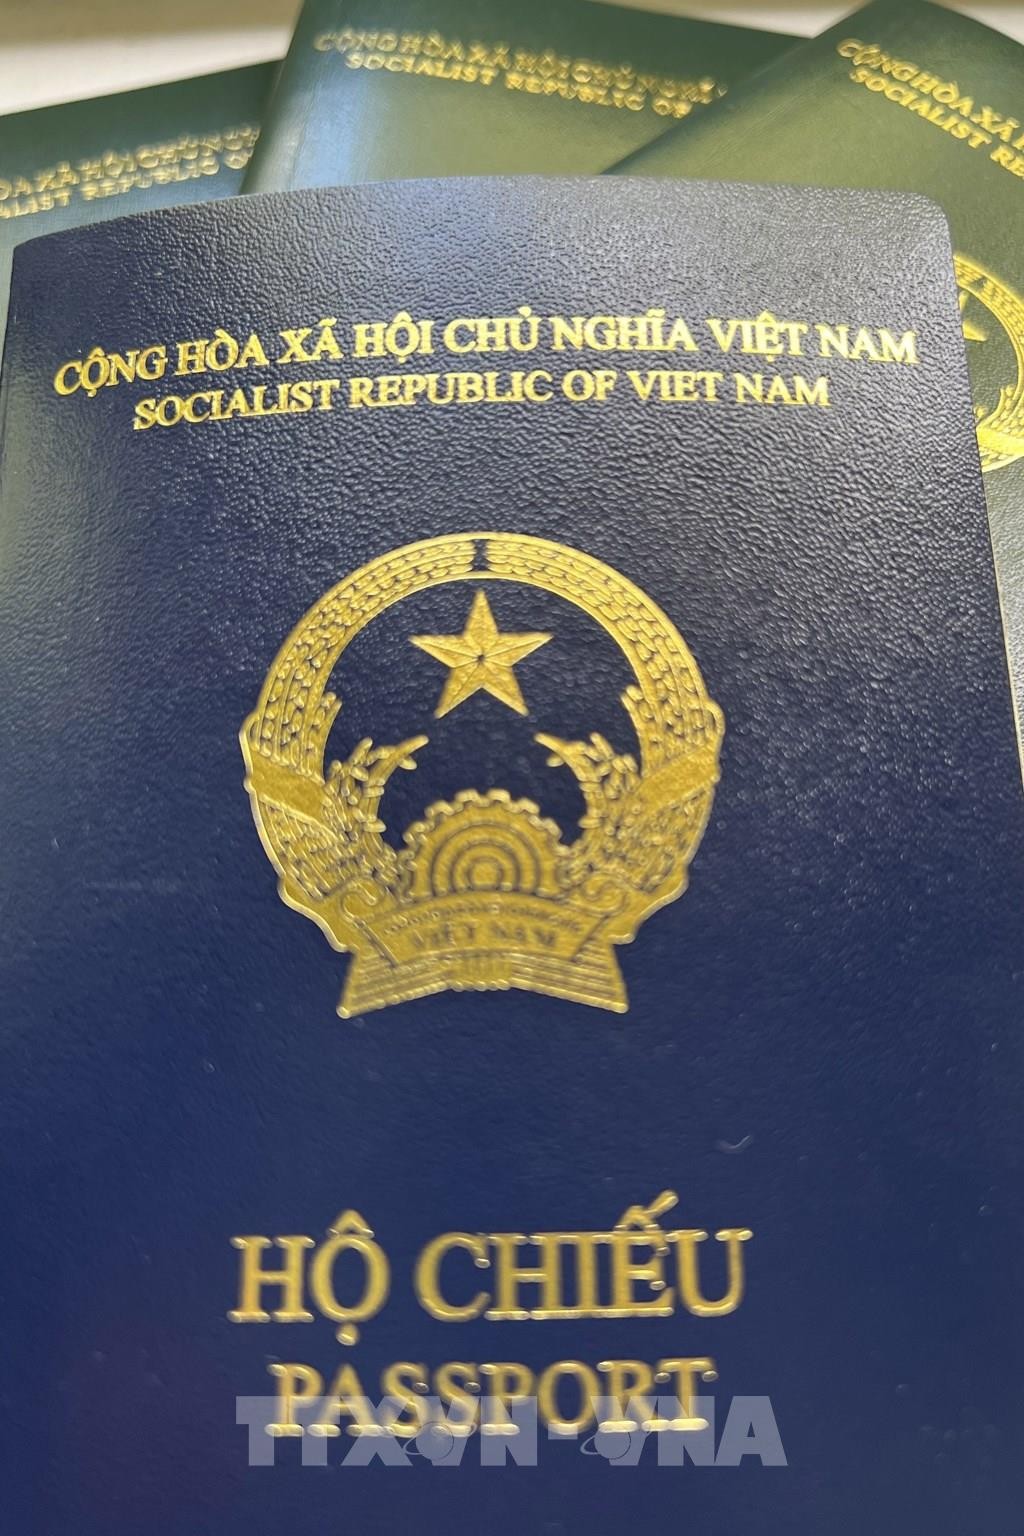 Birthplace information to be printed on new Vietnamese passports. (Source: BNews)